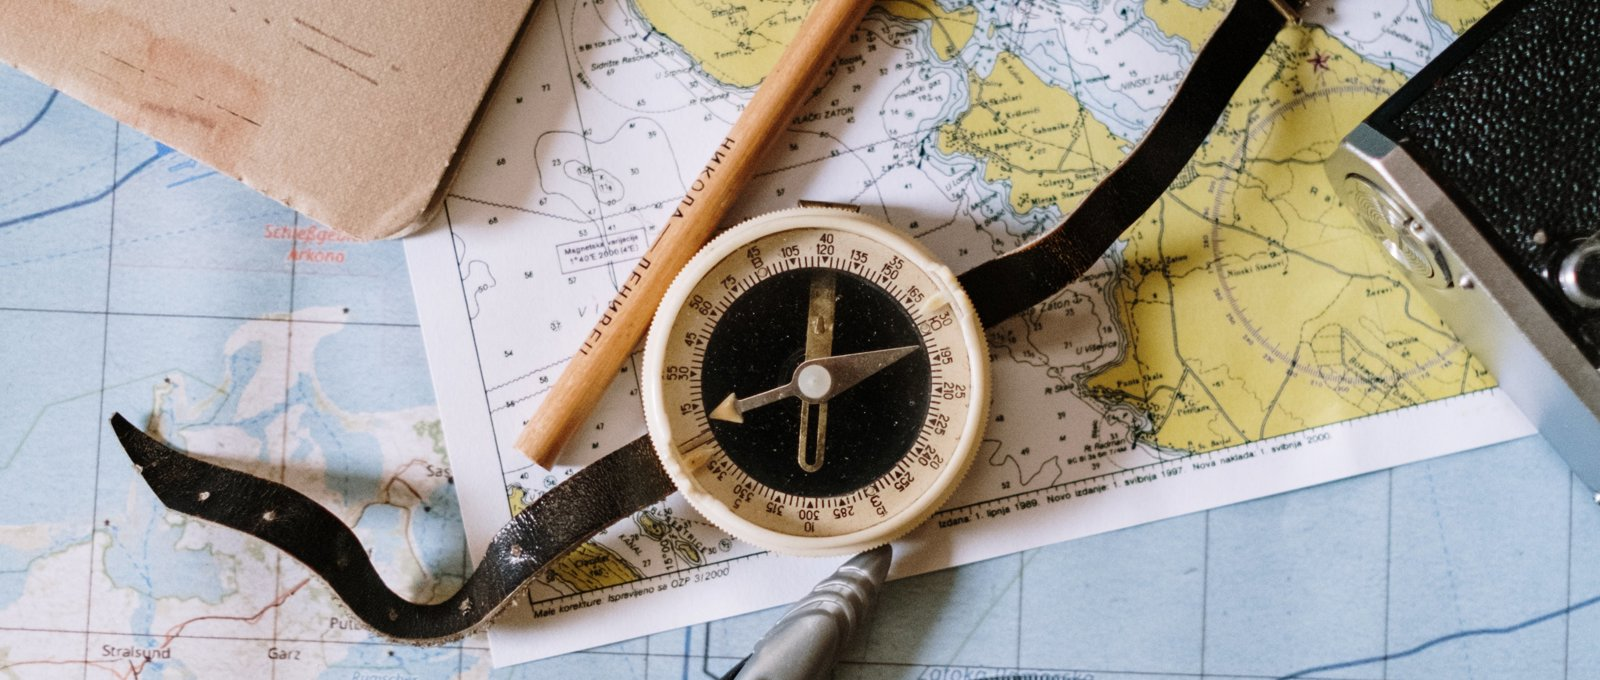 A compass and pencil lying on top of various maps